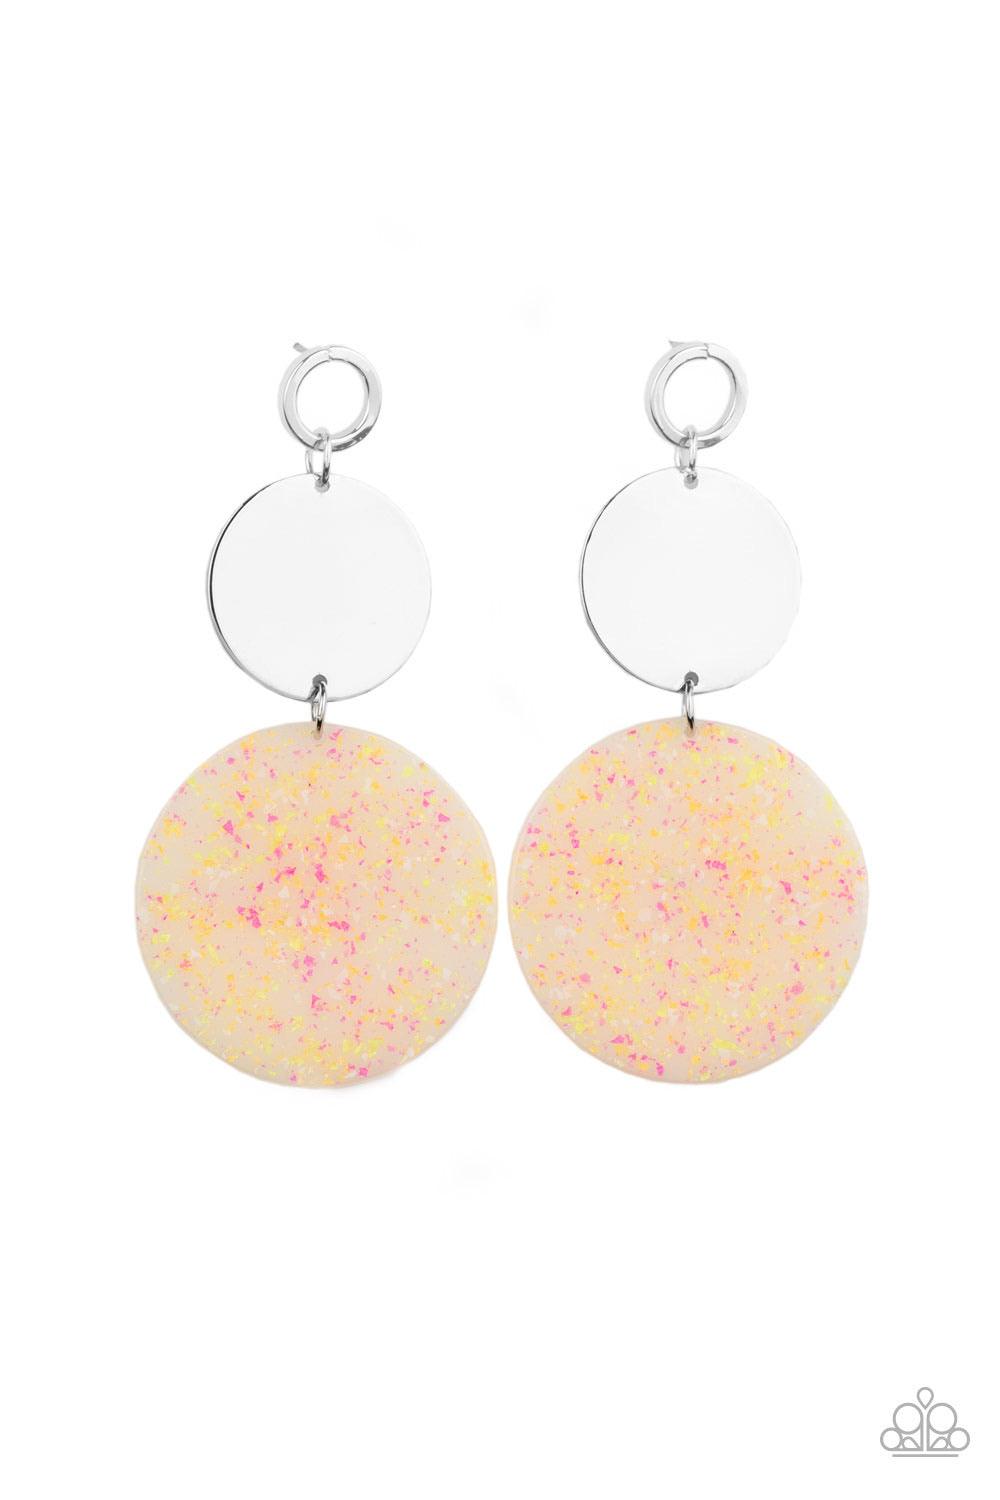 Paparazzi Accessories Beach Day Glow - Multi A speckled acrylic circle swings from the bottom of a glistening silver disc that is attached to an airy circle fitting. The shiny trio links into a colorful lure for a retro look. Earring attaches to a standar